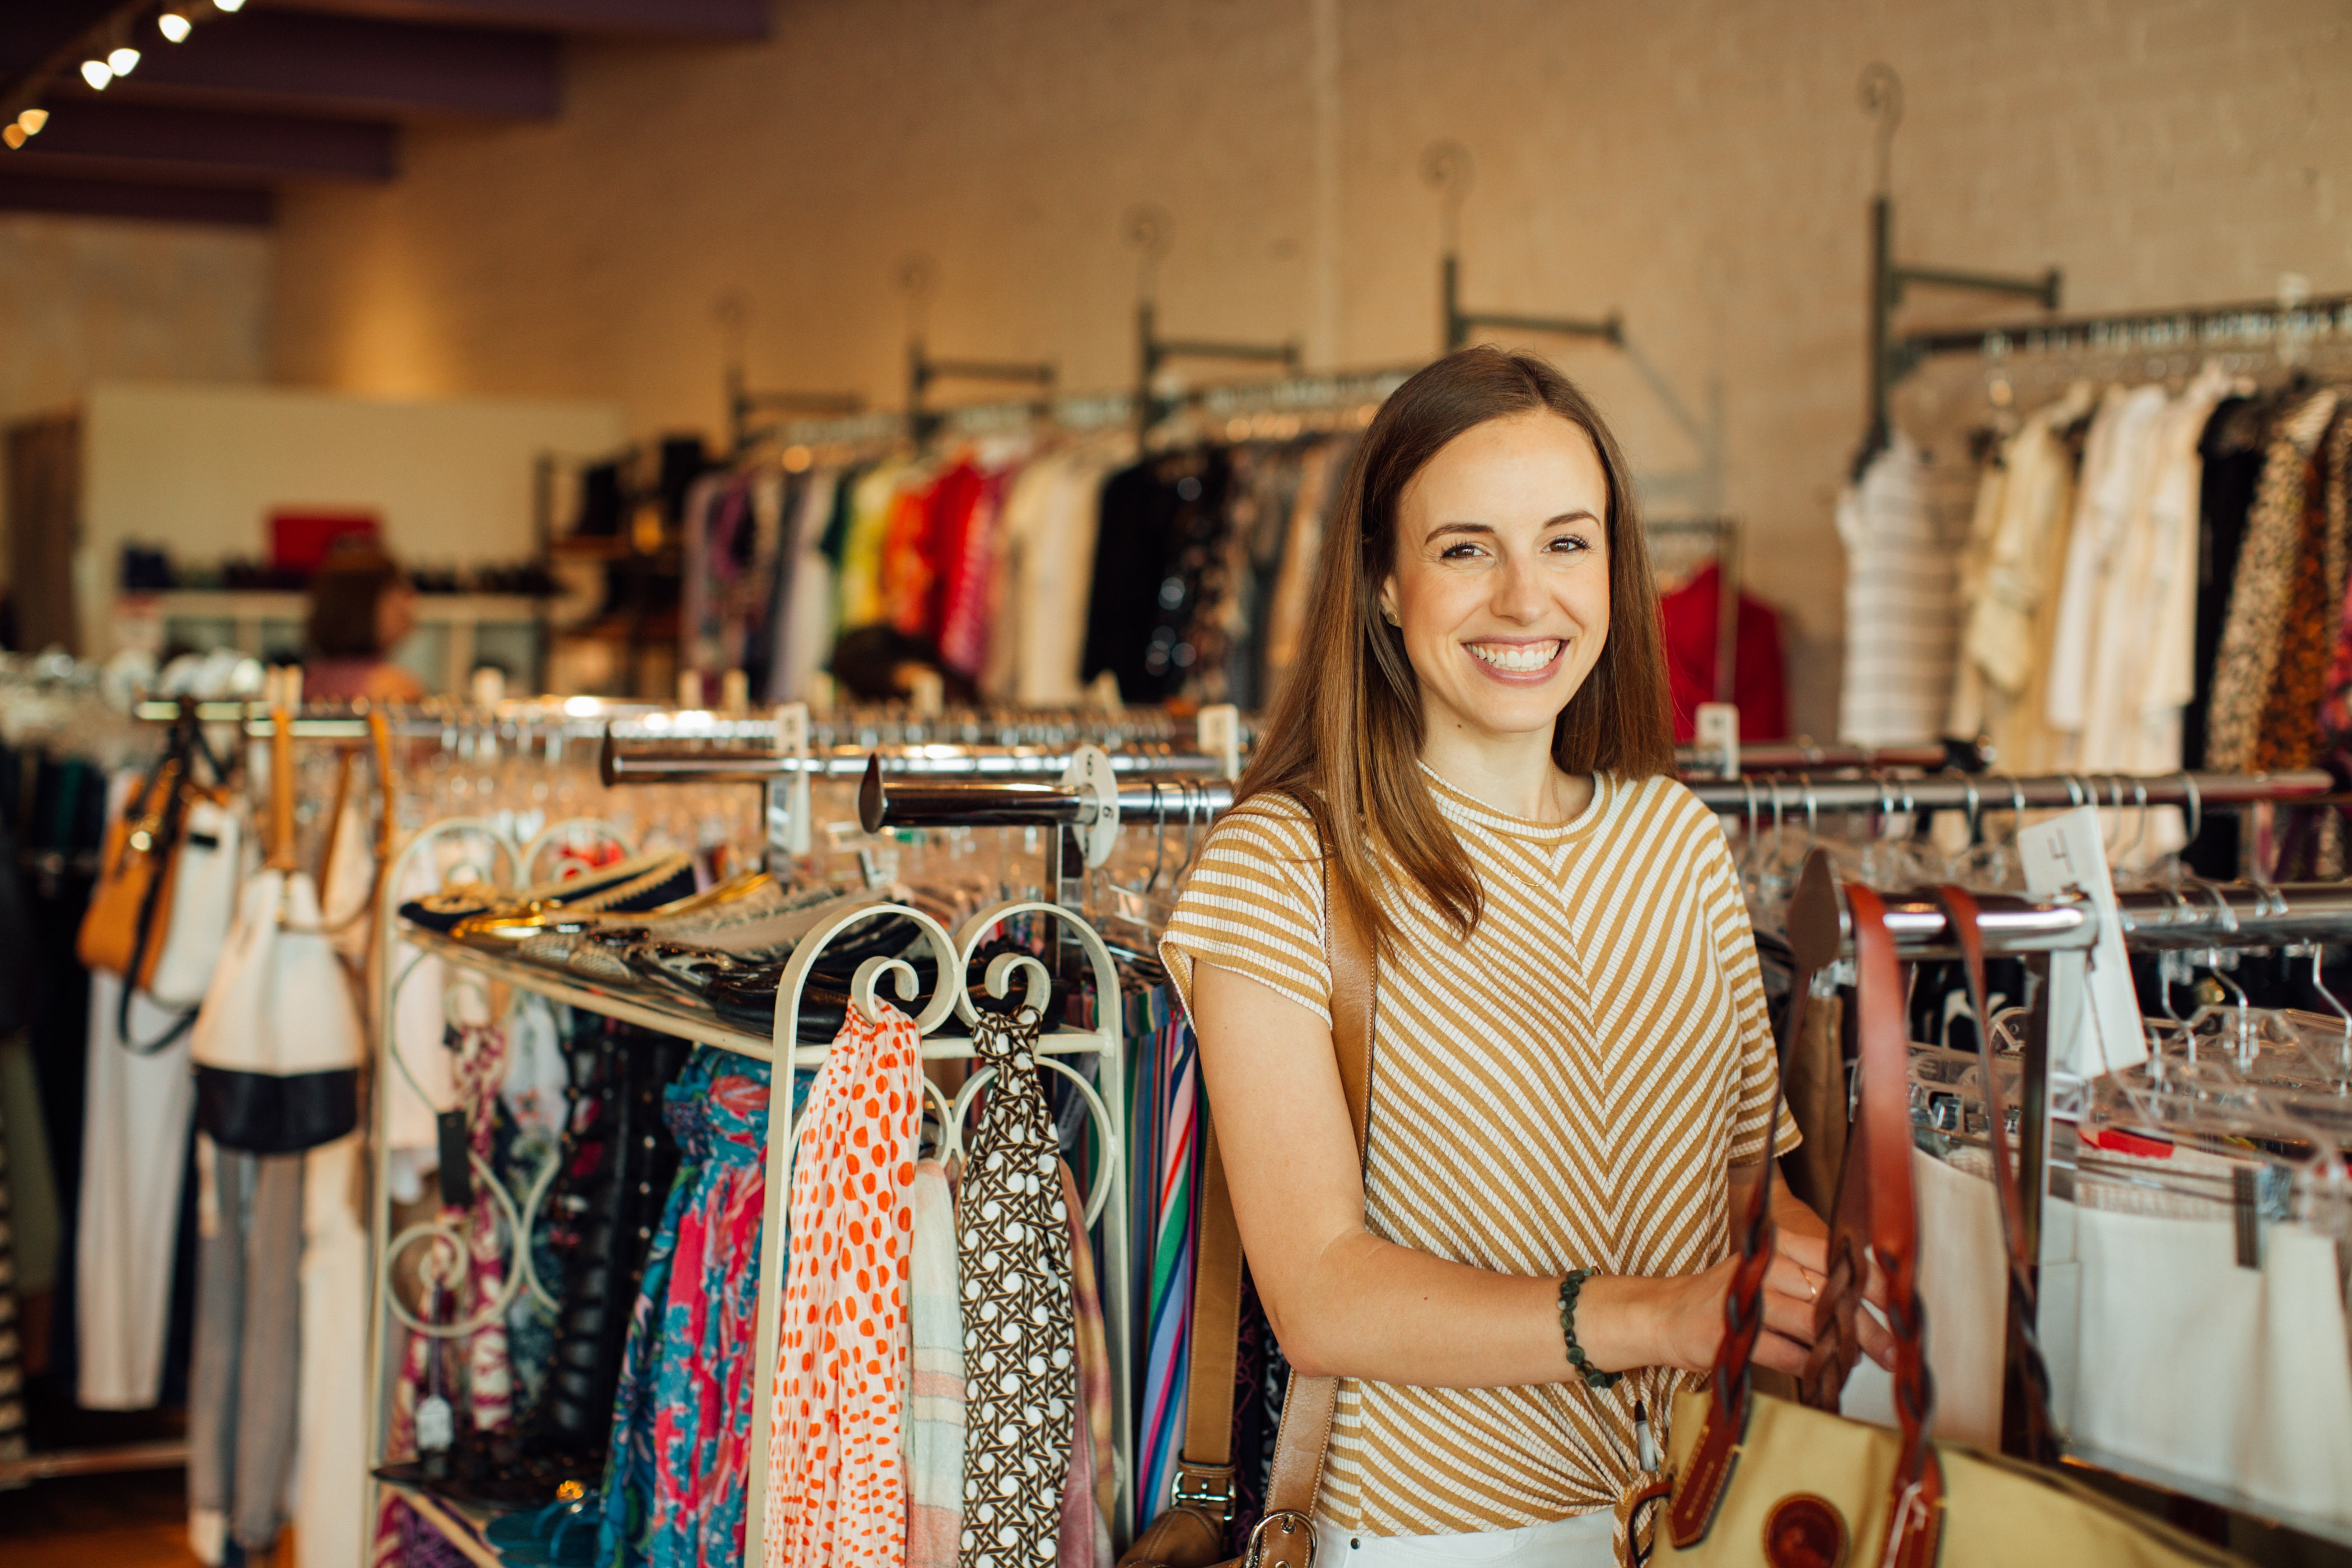  6 Tips for Consignment Clothes Shopping Success  |  Fairly Southern  |  Fifi's Consignment in Raleigh, NC